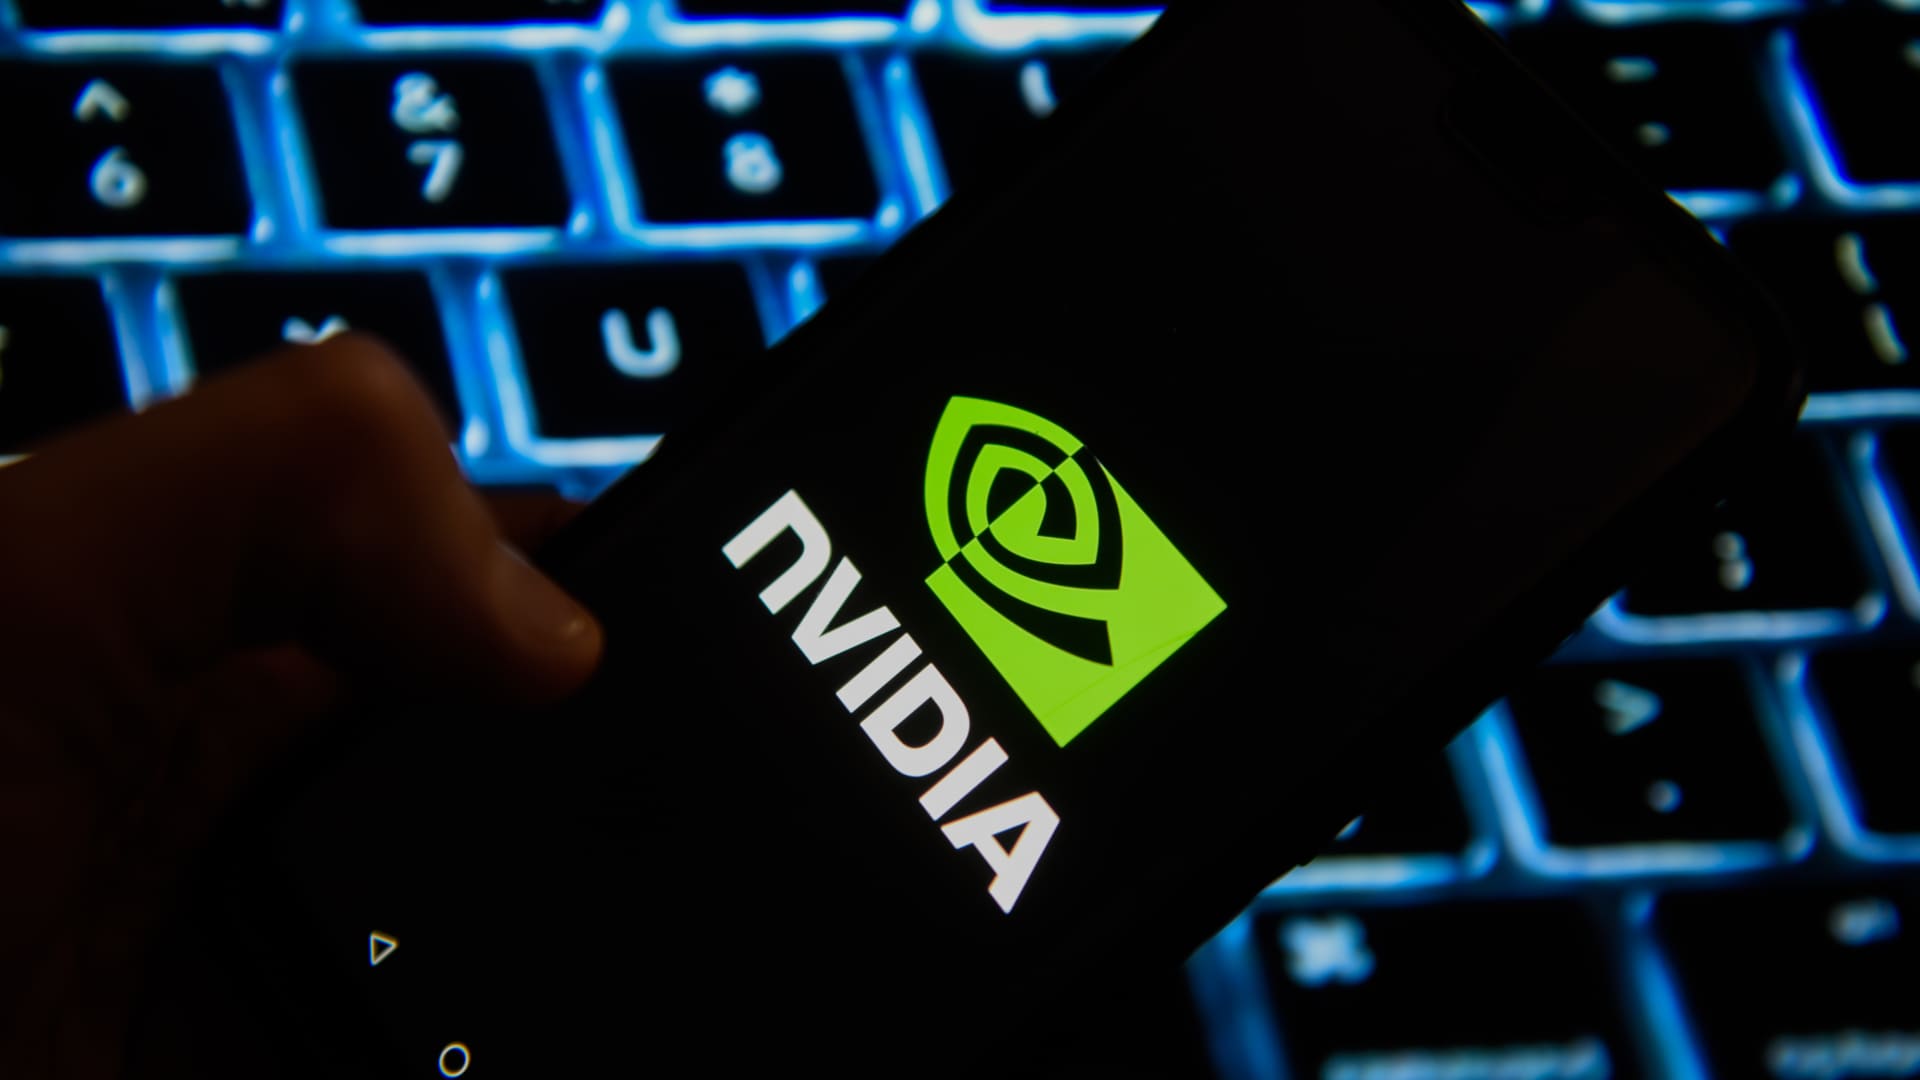 Analysts offer insights on the future of Nvidia: Sell or stick with it?